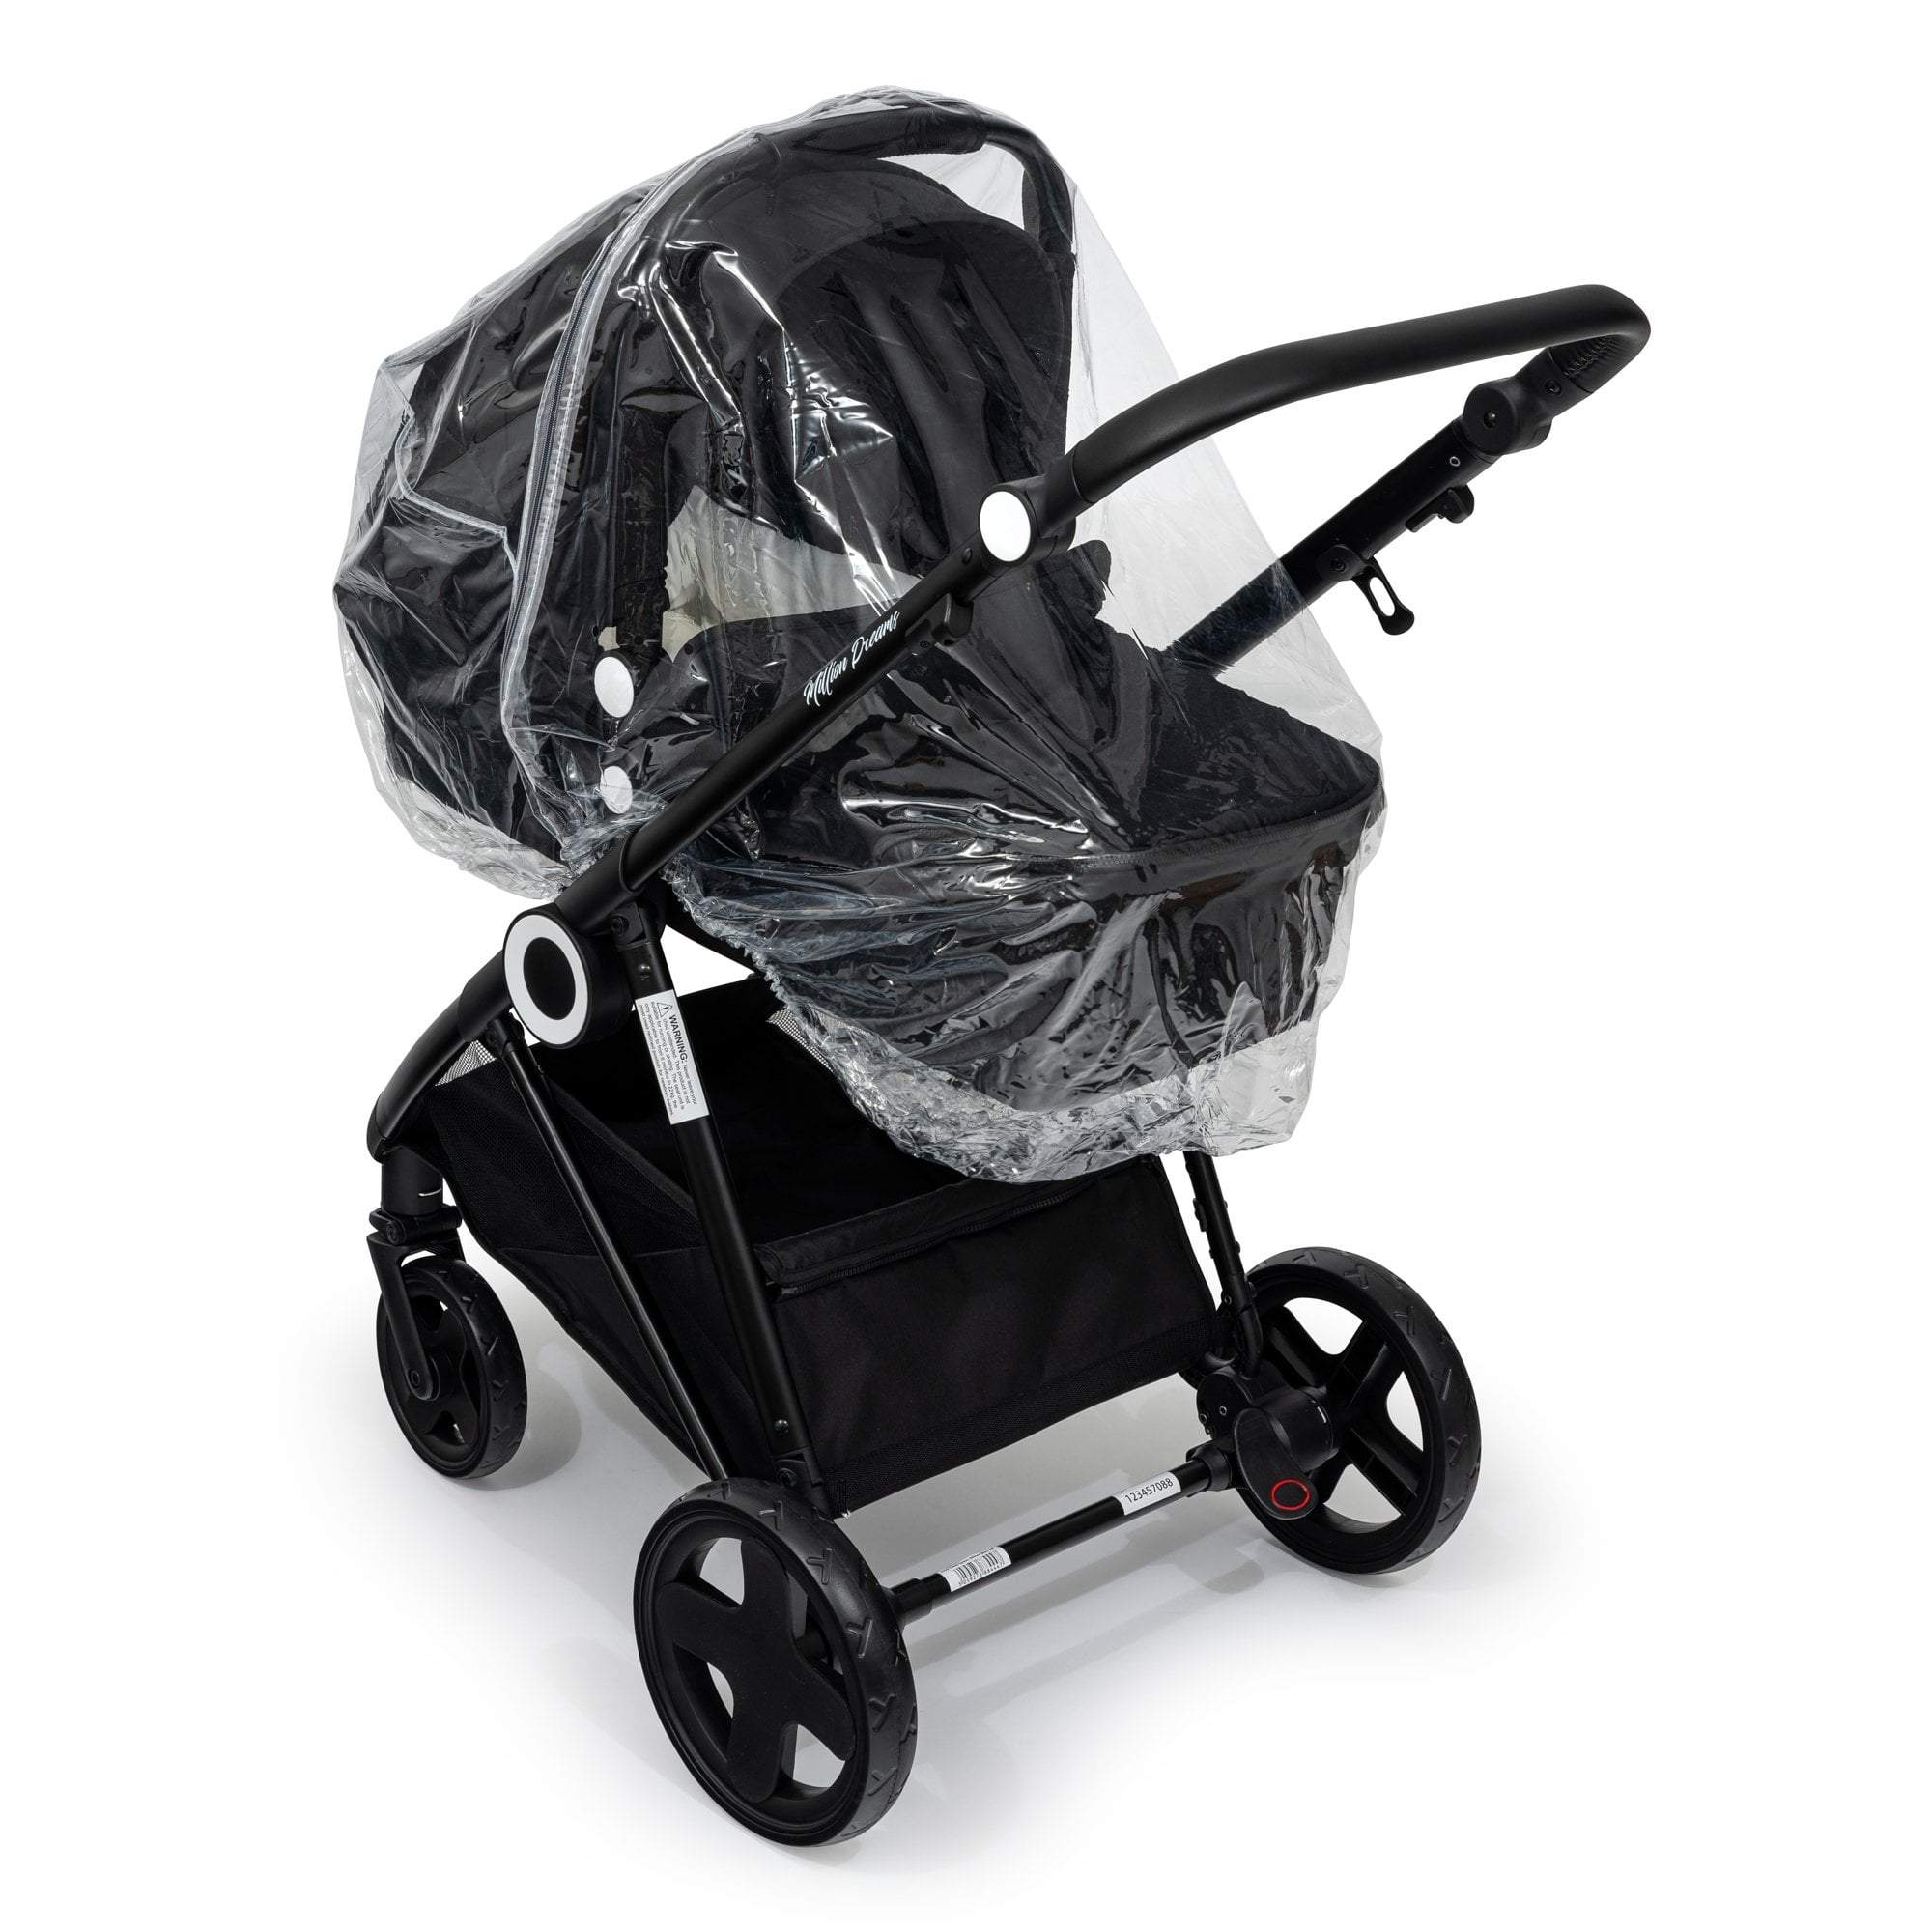 Carrycot Raincover Compatible With Recaro - Fits All Models - For Your Little One